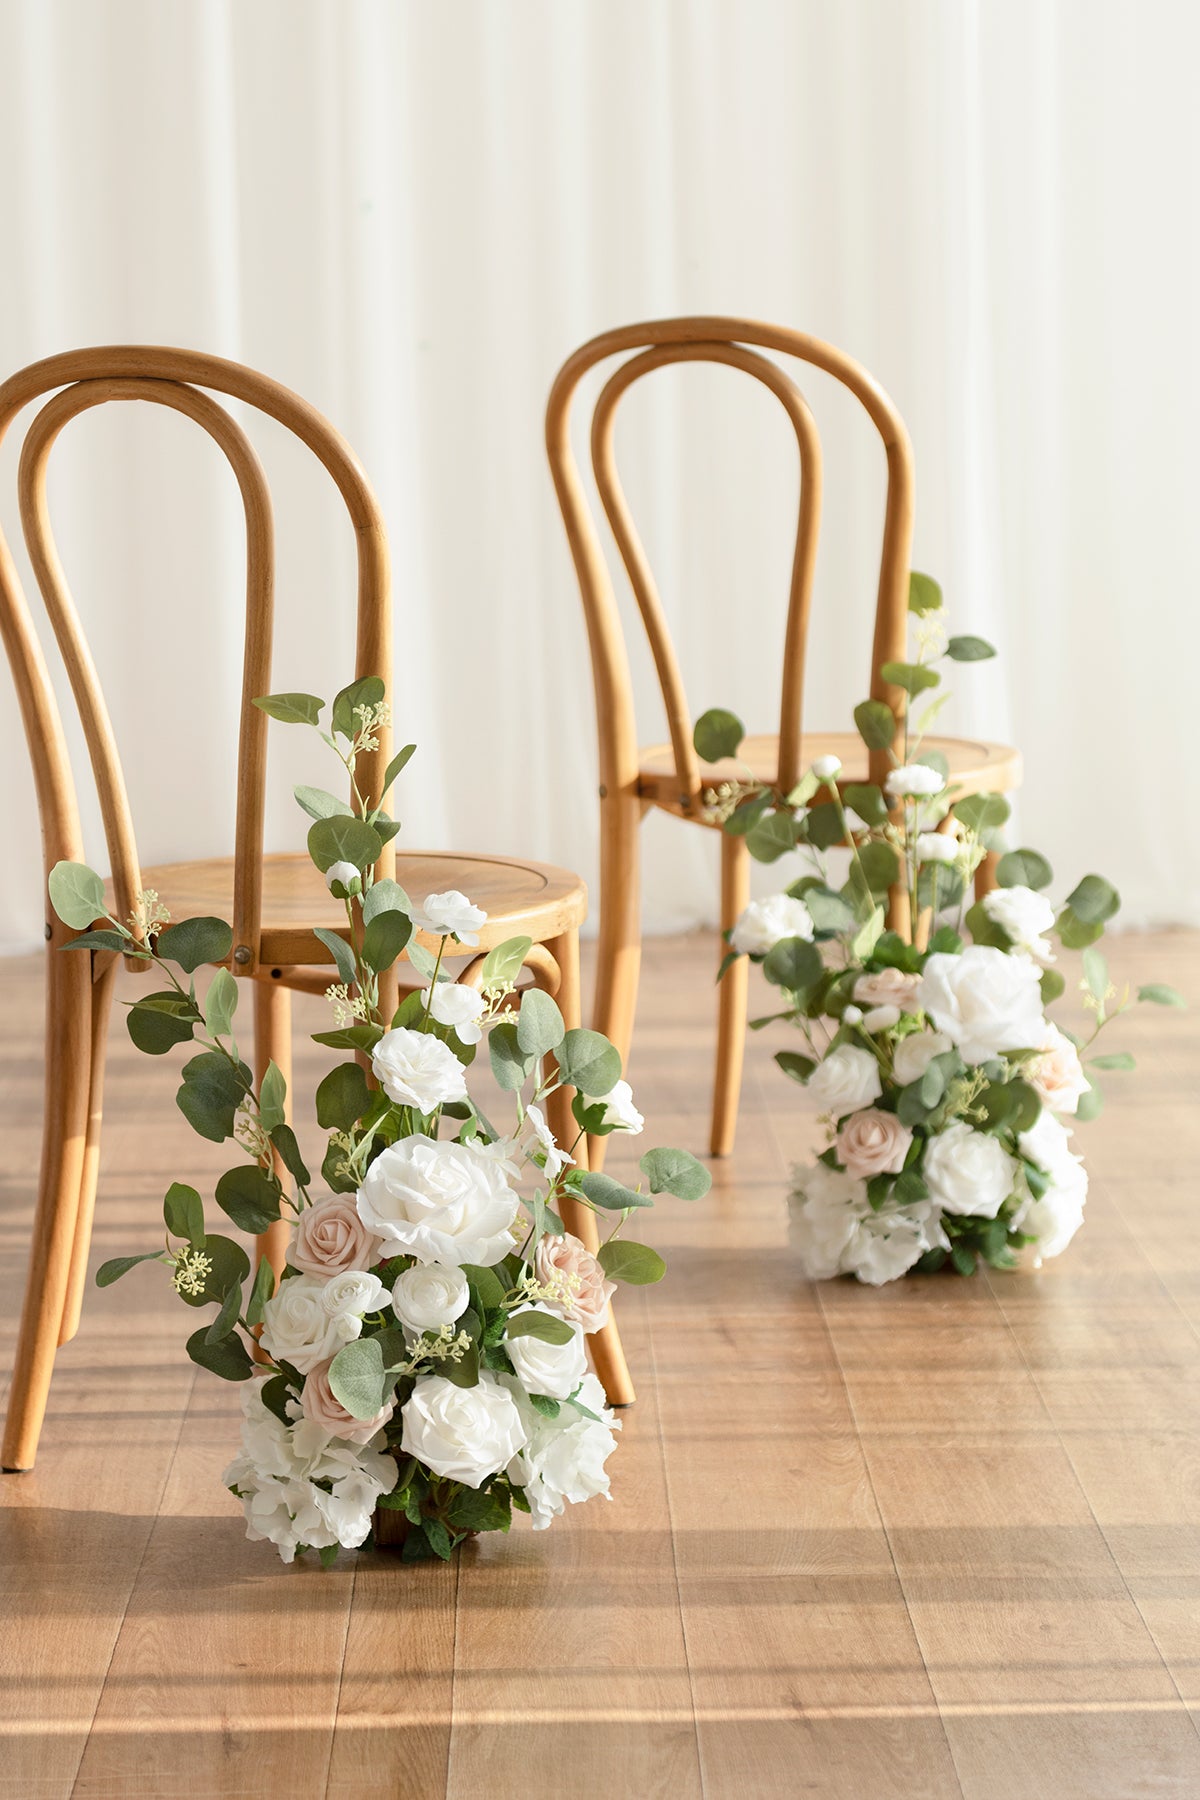 Ling's Moment Wedding Chair Decorations Aisle Pew Artificial Flowers with  Hanging Chiffon Fabric 8pcs White Sage Green for Ceremony Reception Floral